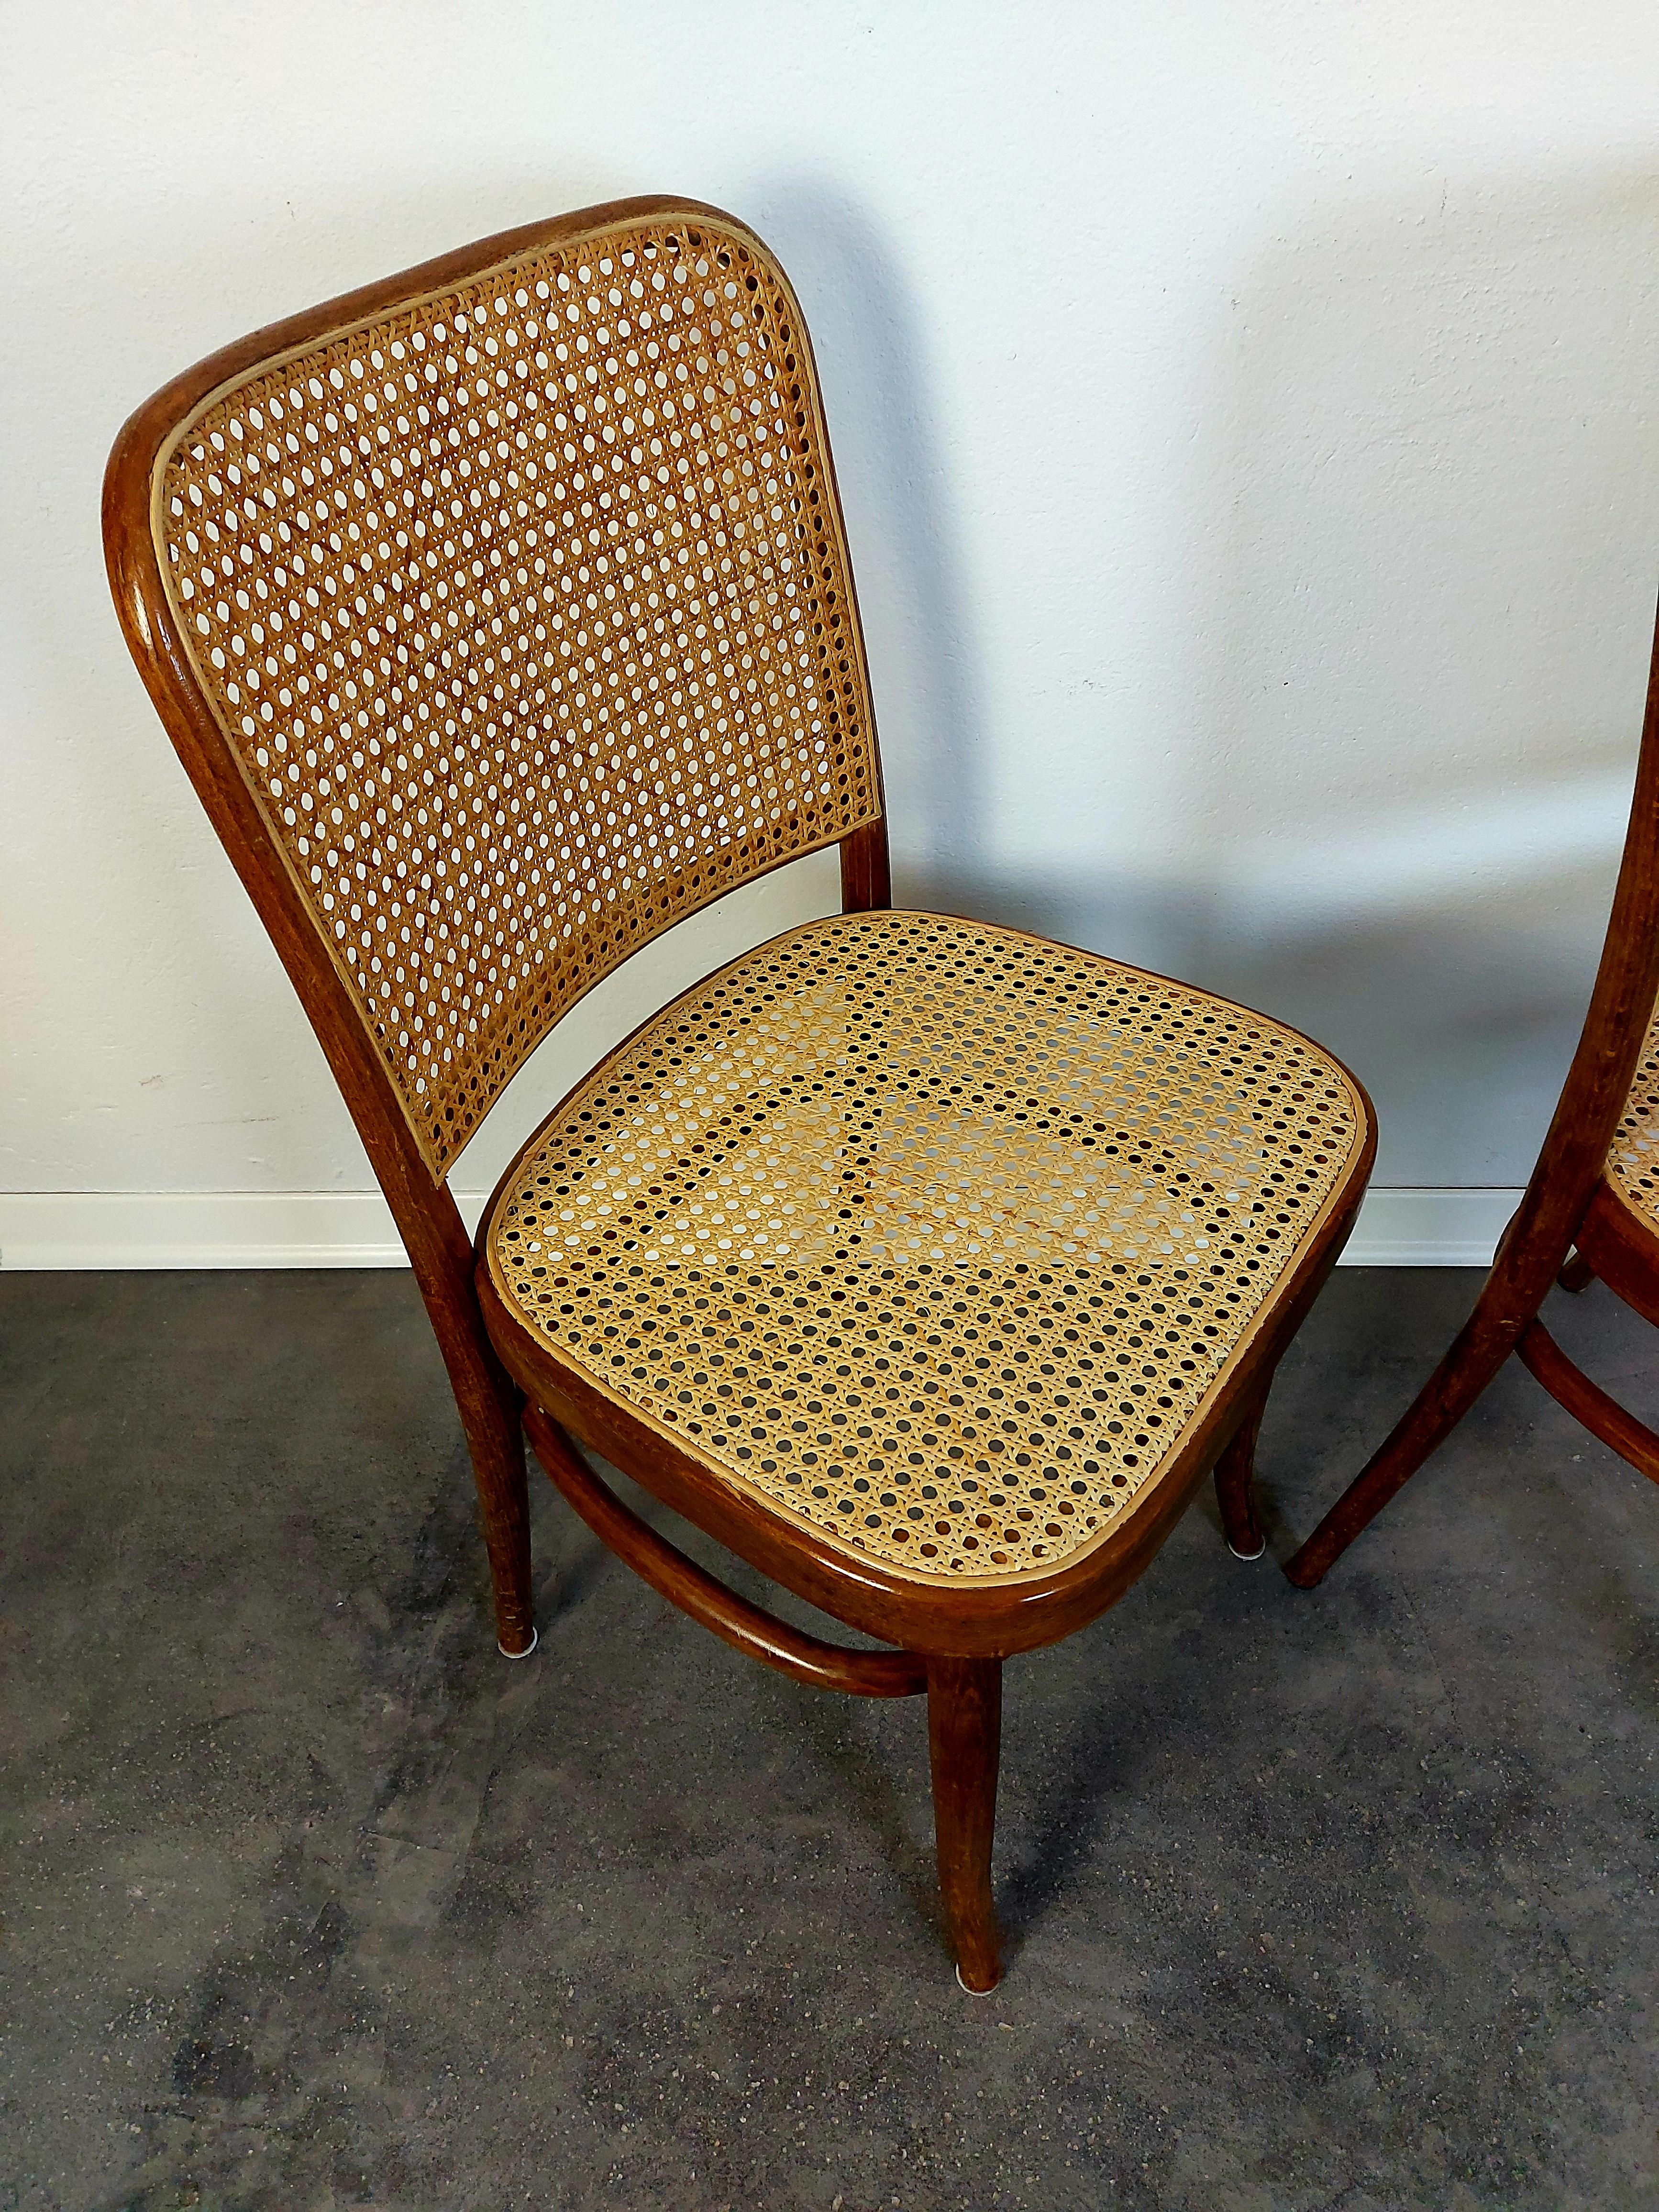 Late 20th Century Prague Chair, No. 811 Bentwood Chair, 1970s, 1 of 2